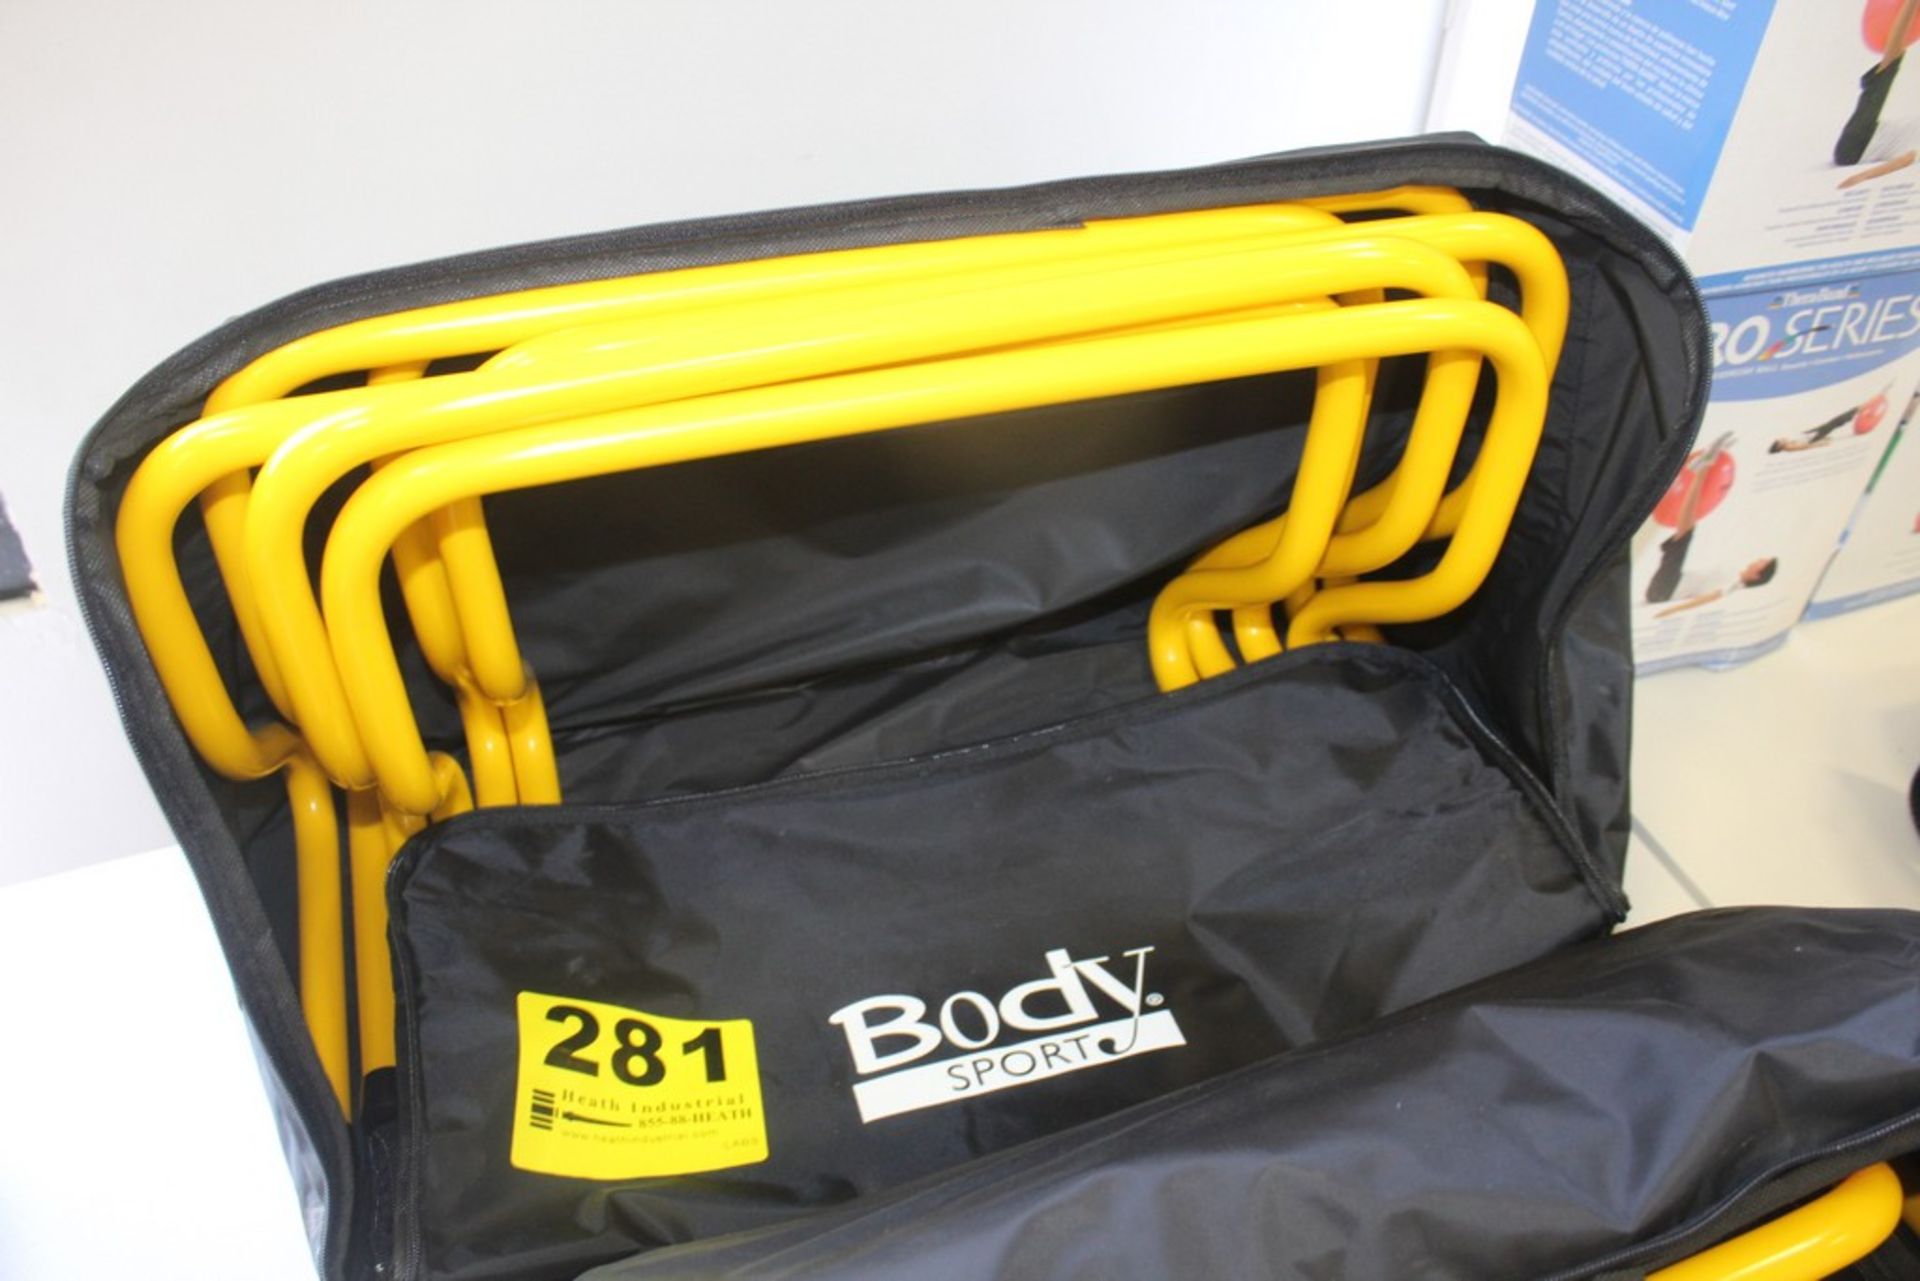 BODY SPORTS PORTABLE SPEED HURDLES WITH CARRYING BAG